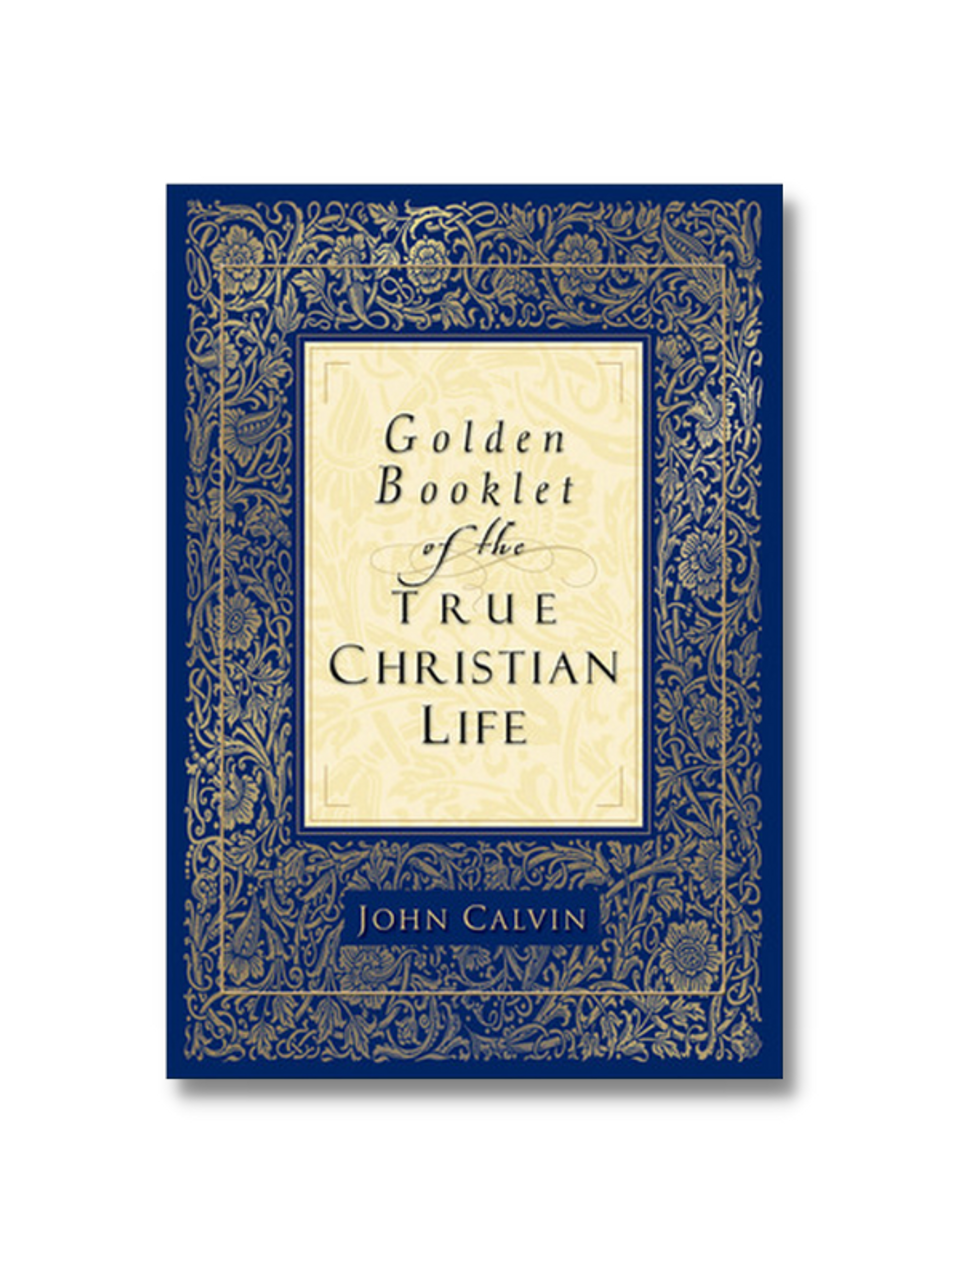 Golden Booklet of the True Christian Life (Paperback)